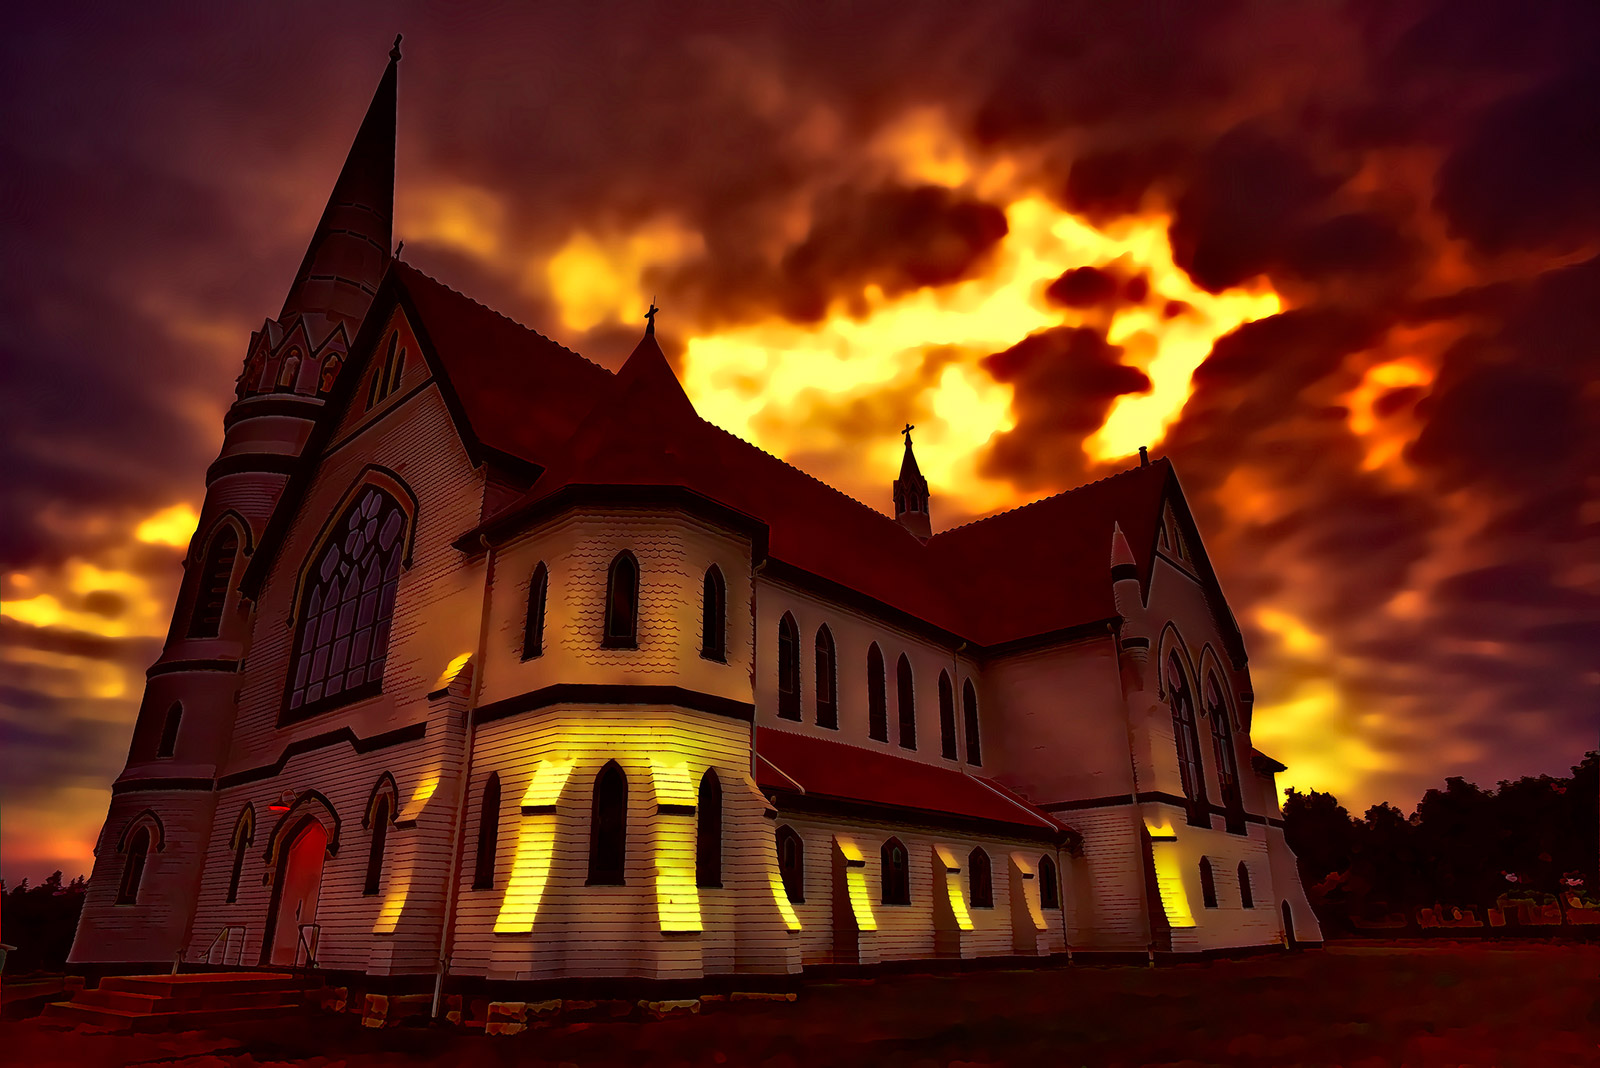 End Times at St. Mary's Church, Indian River, Prince Edward Island, Canada